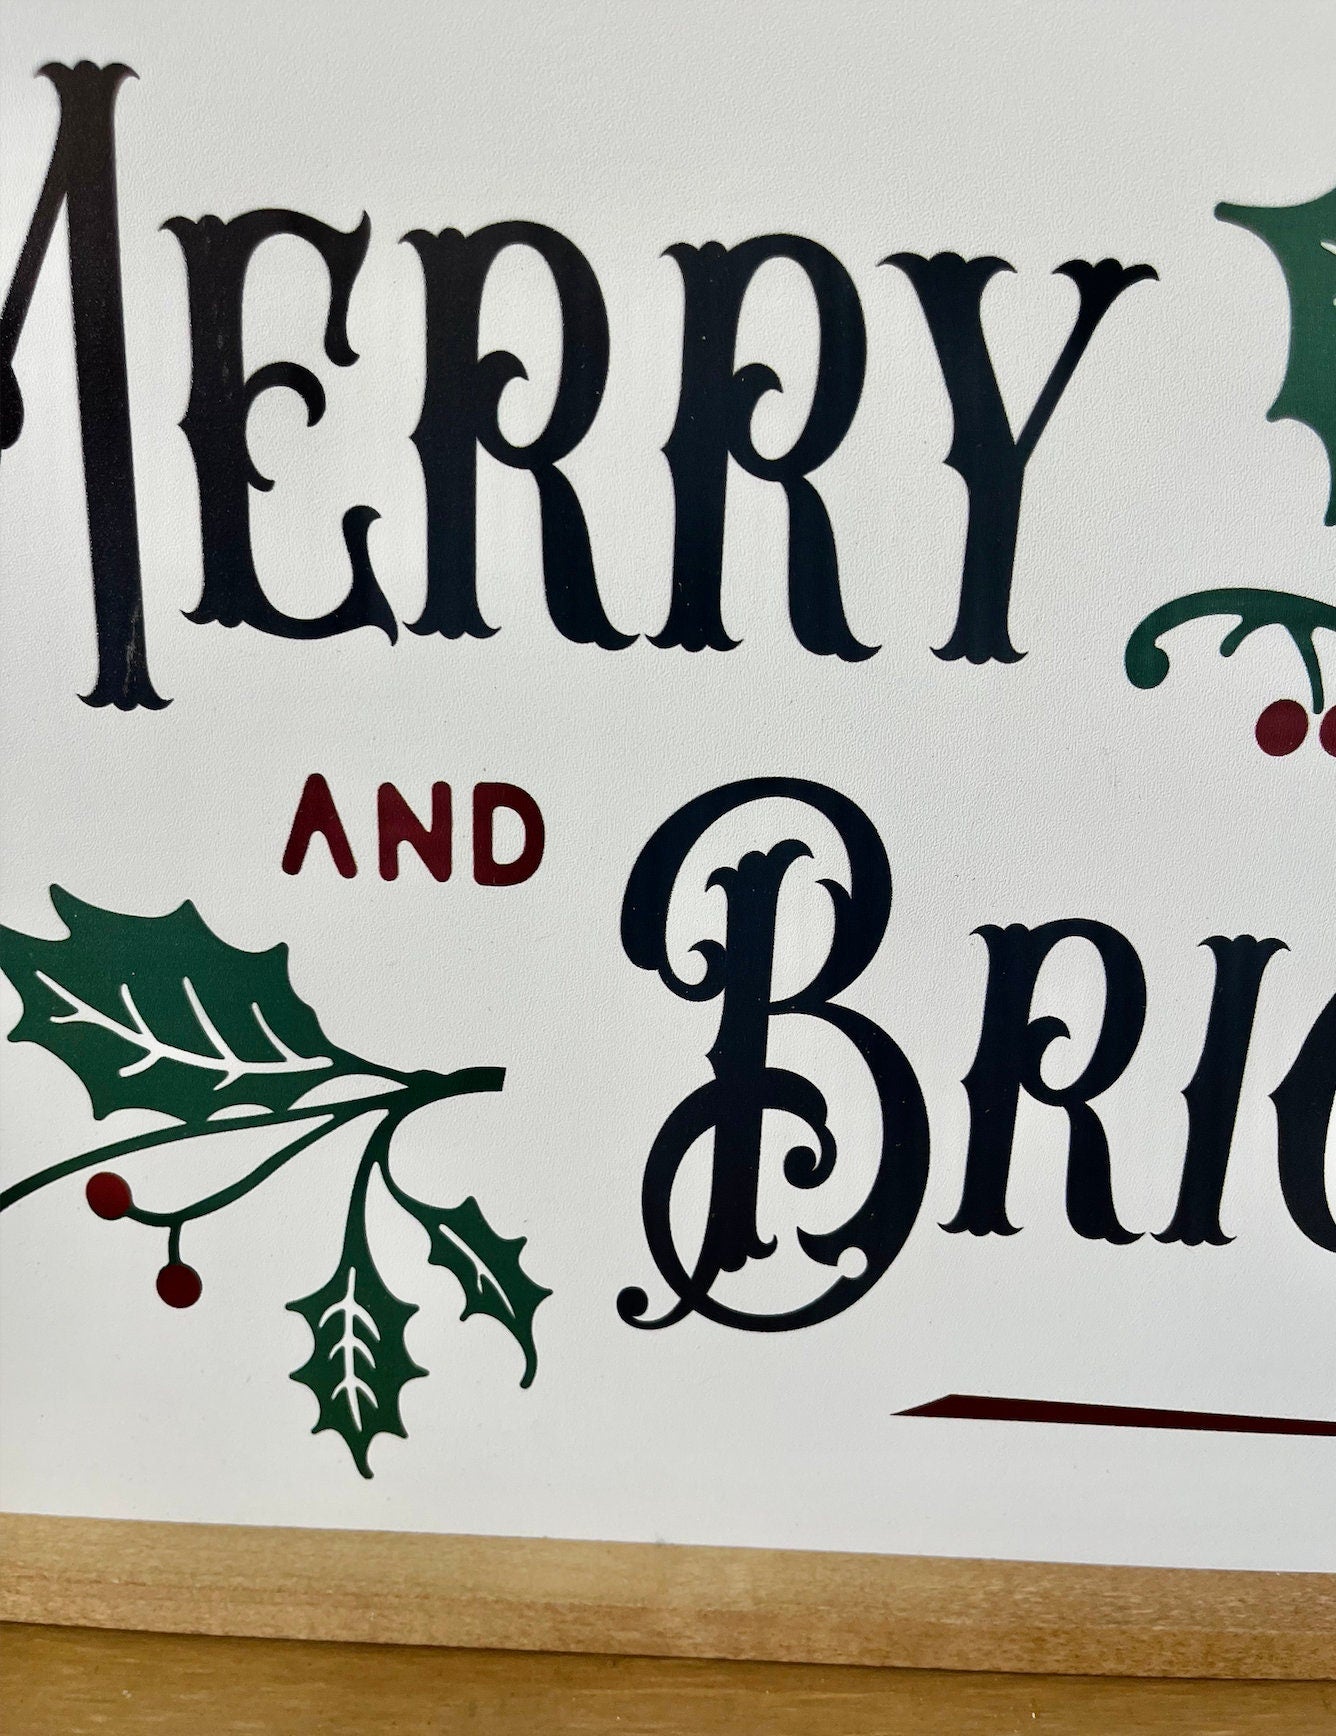 Old Fashion Traditional Merry and Bright Red and Green Holly christmas wood sign